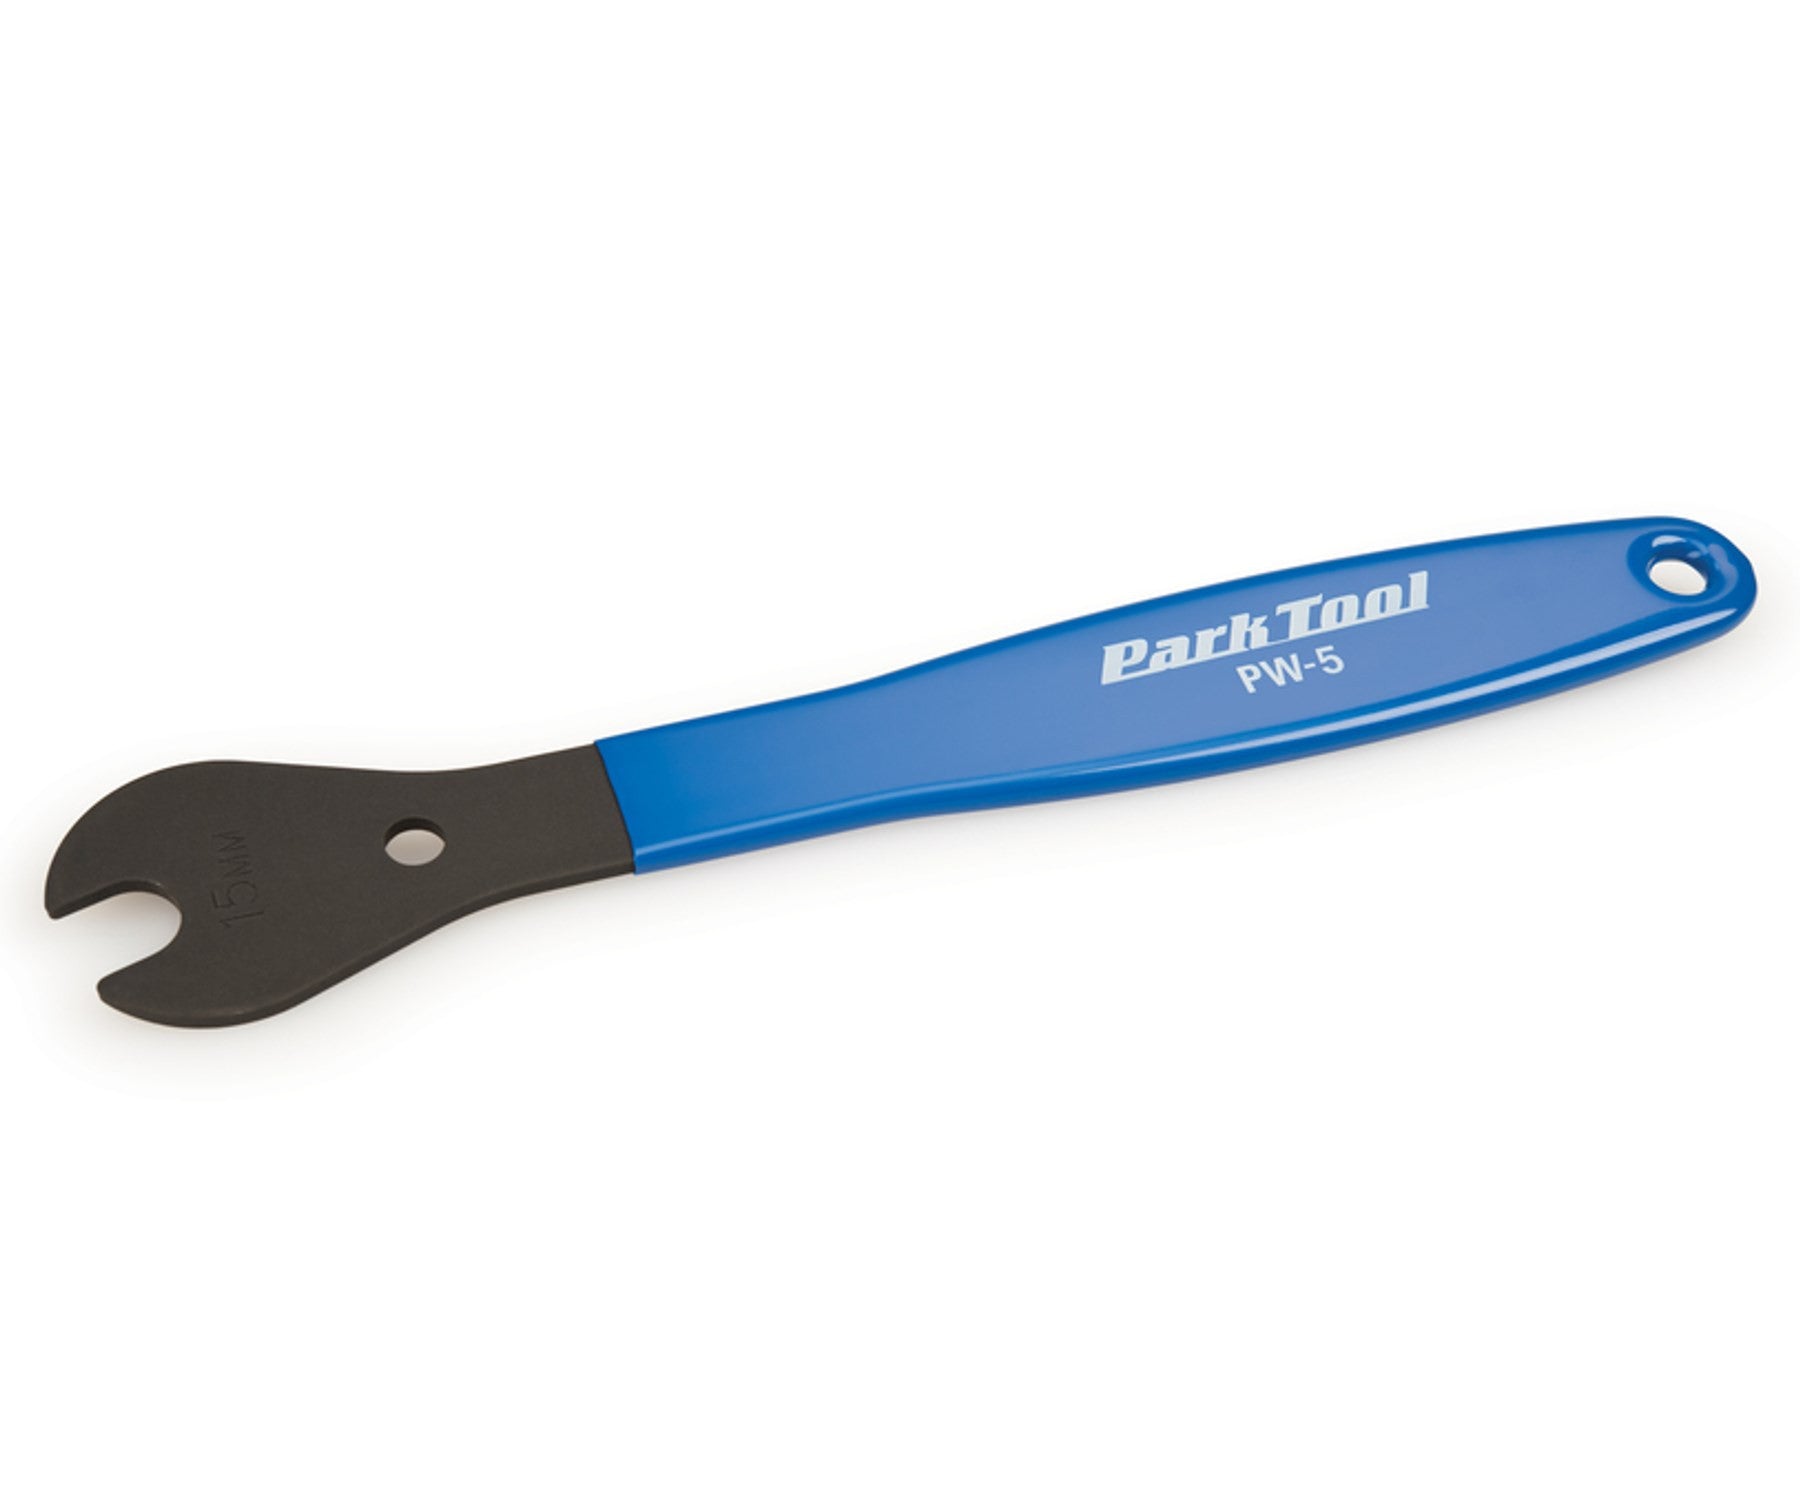 Park Tool PW-5 pedal wrench - Retrogression Fixed Gear